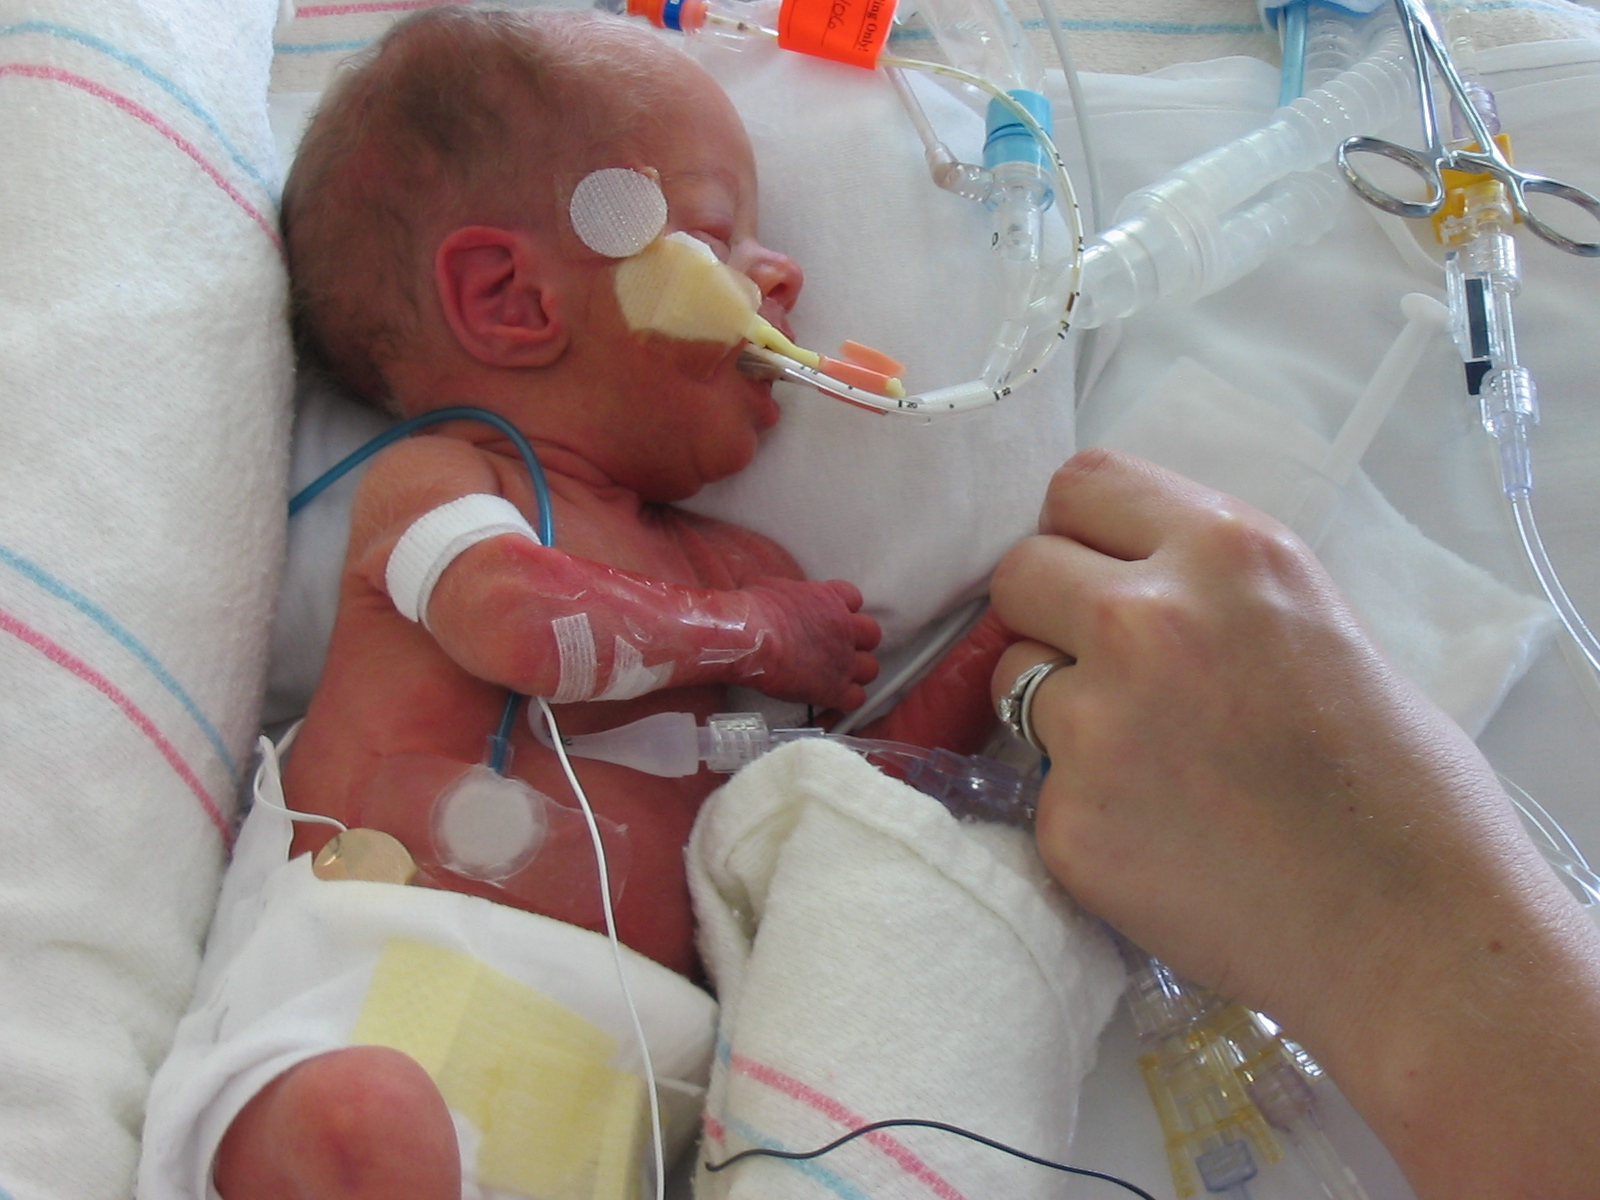 a baby being hooked up with oxygen in its mouth